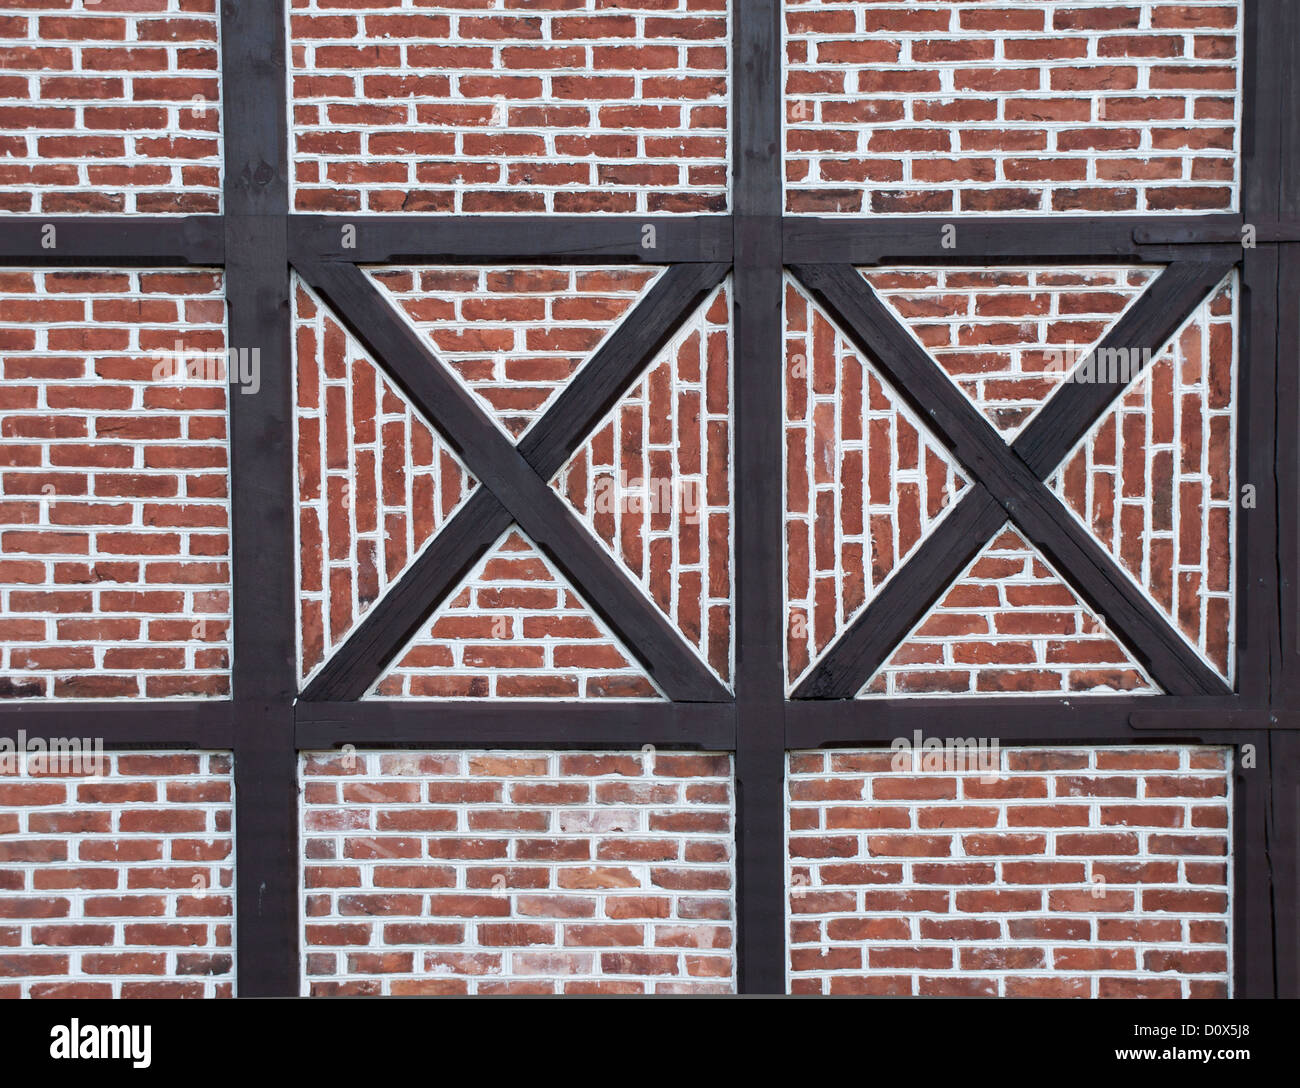 Timber framing also called post-and-beam construction makes beautiful patterns when photographed close up, here in Oslo Norway Stock Photo